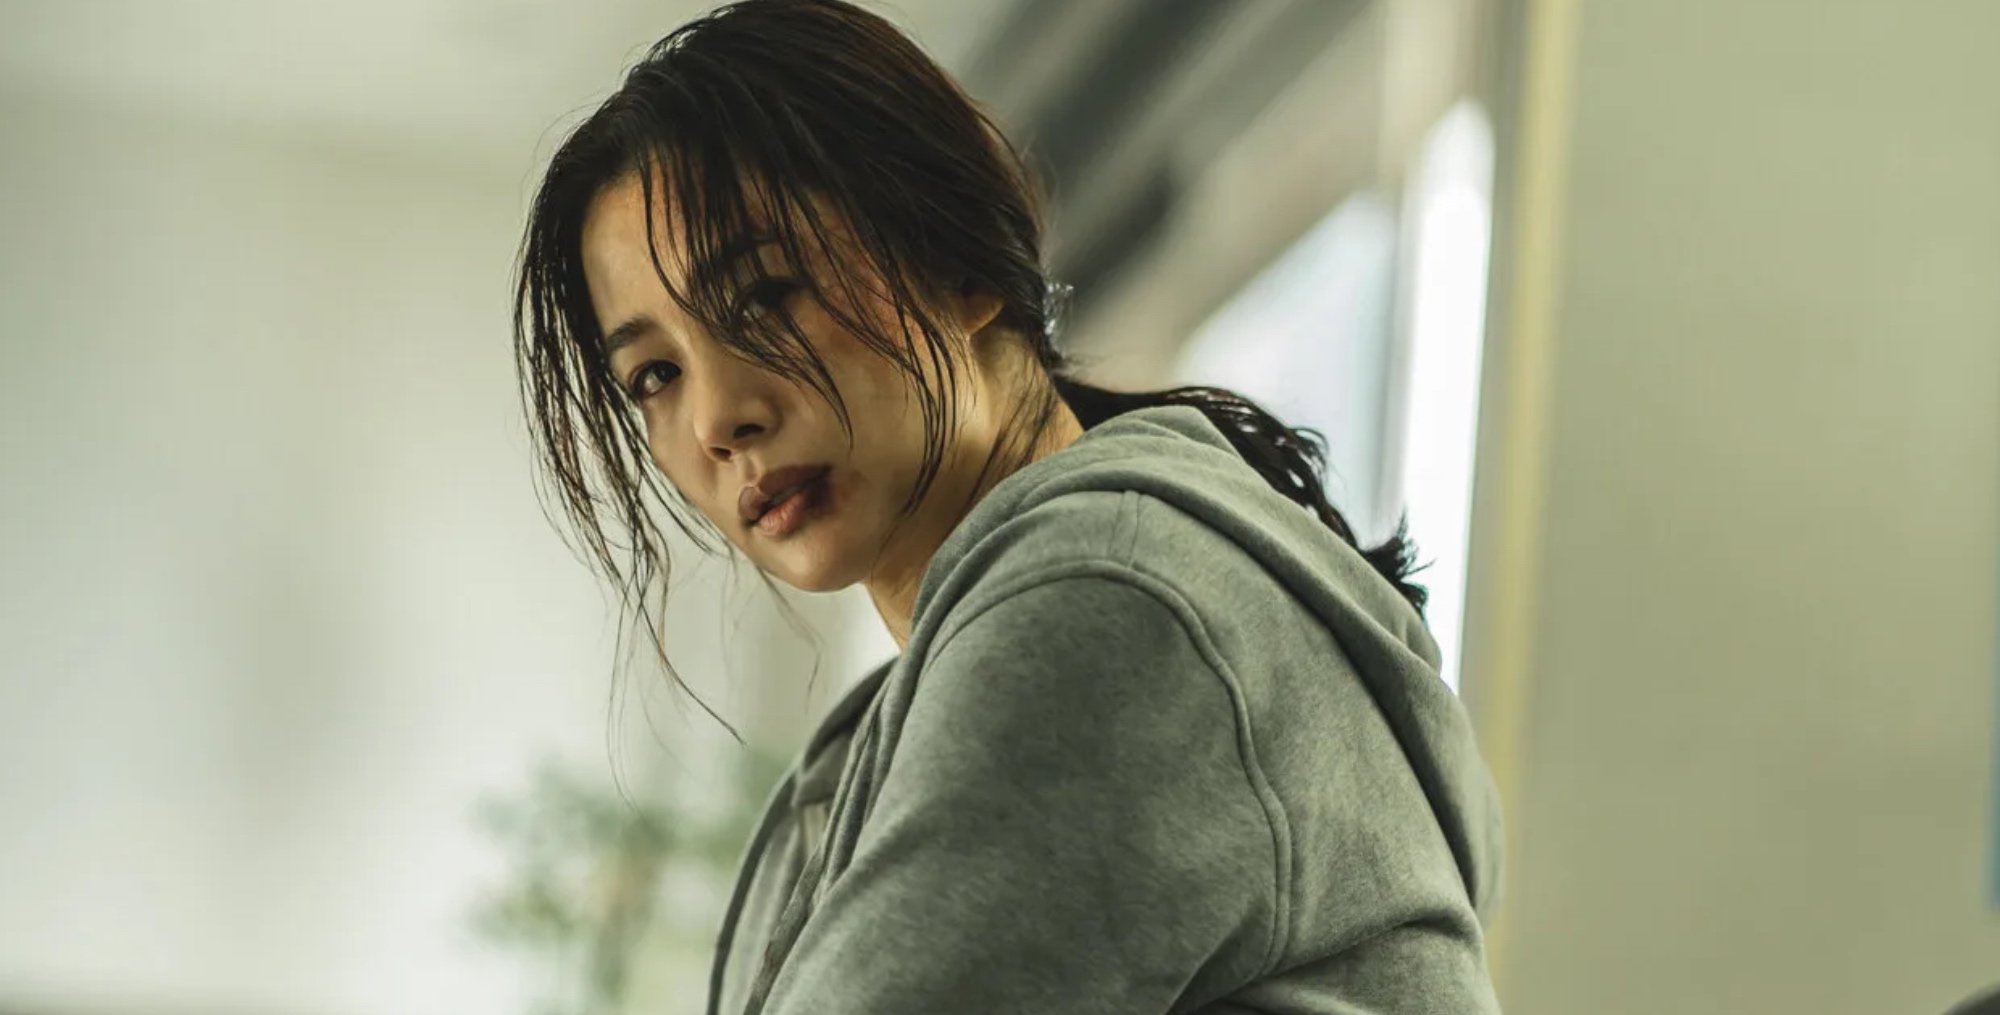 Female lead Han Hye-jin from 'Hellbound' K-drama wearing red sweater and bruised face.